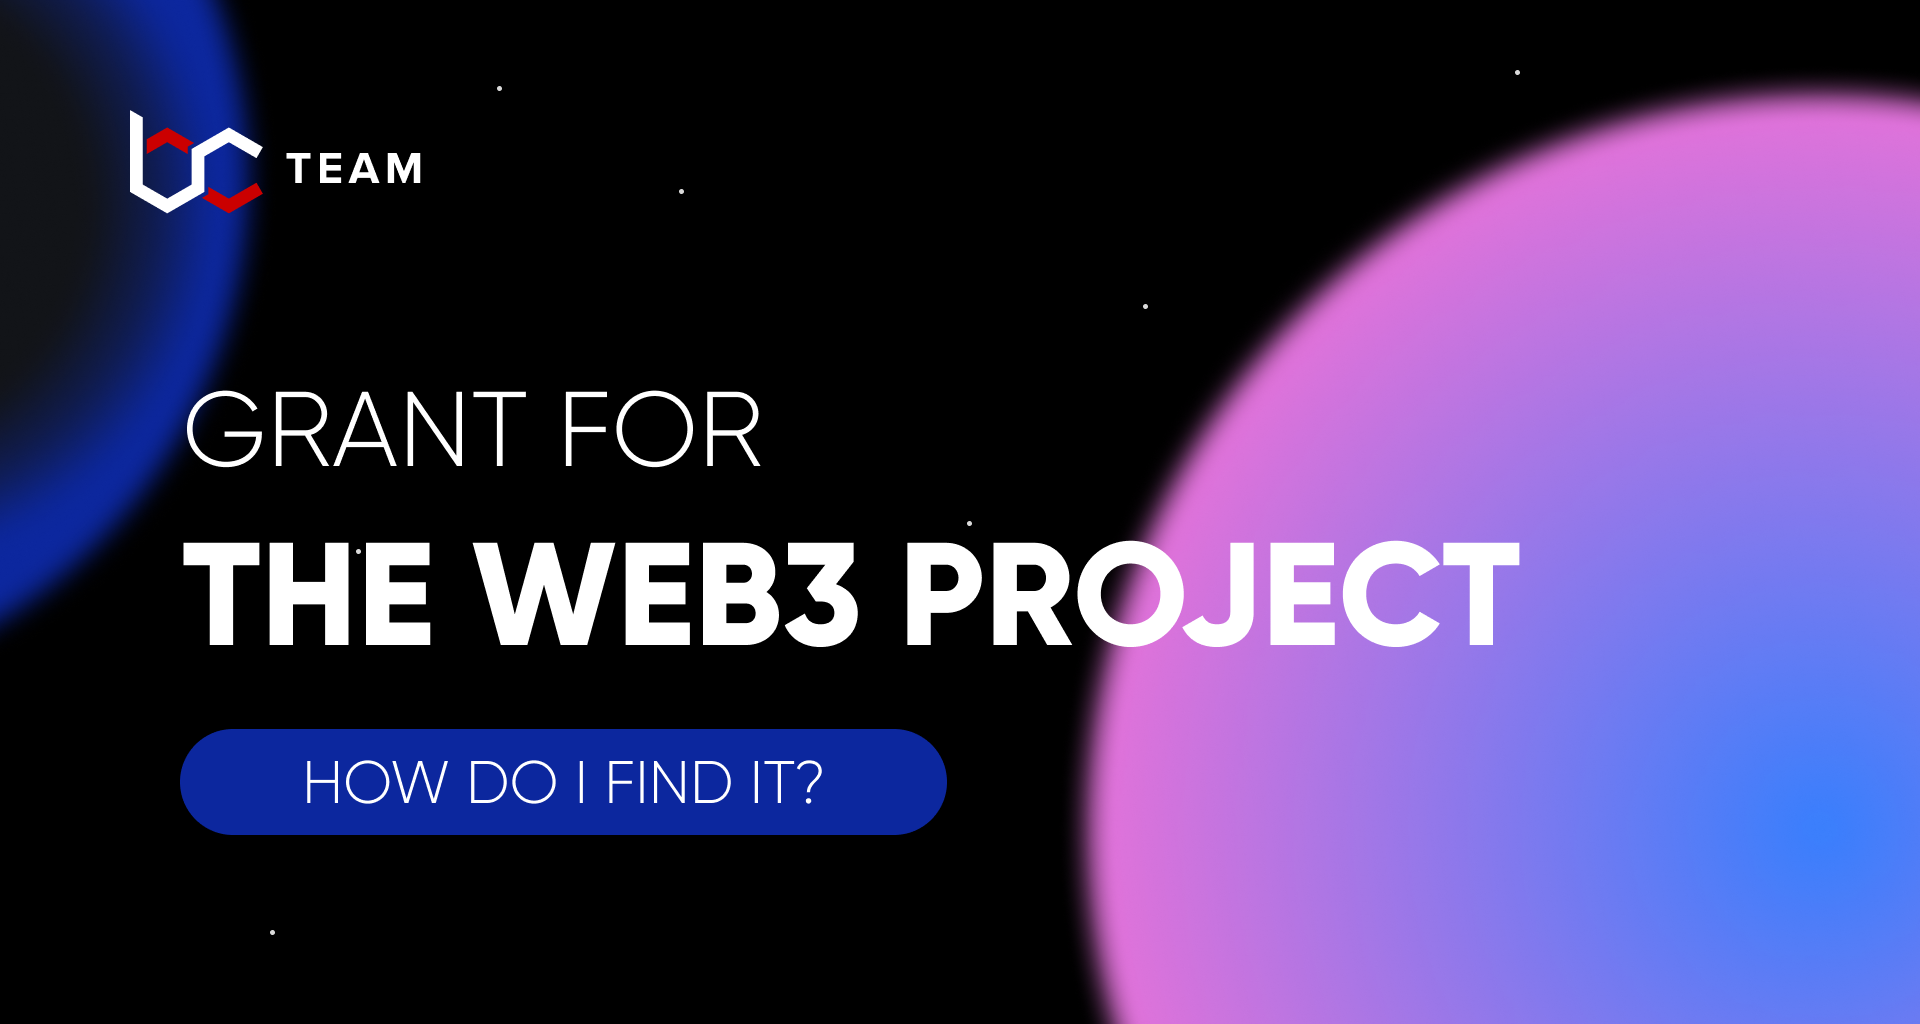 How do I find a grant for a Web3 project?